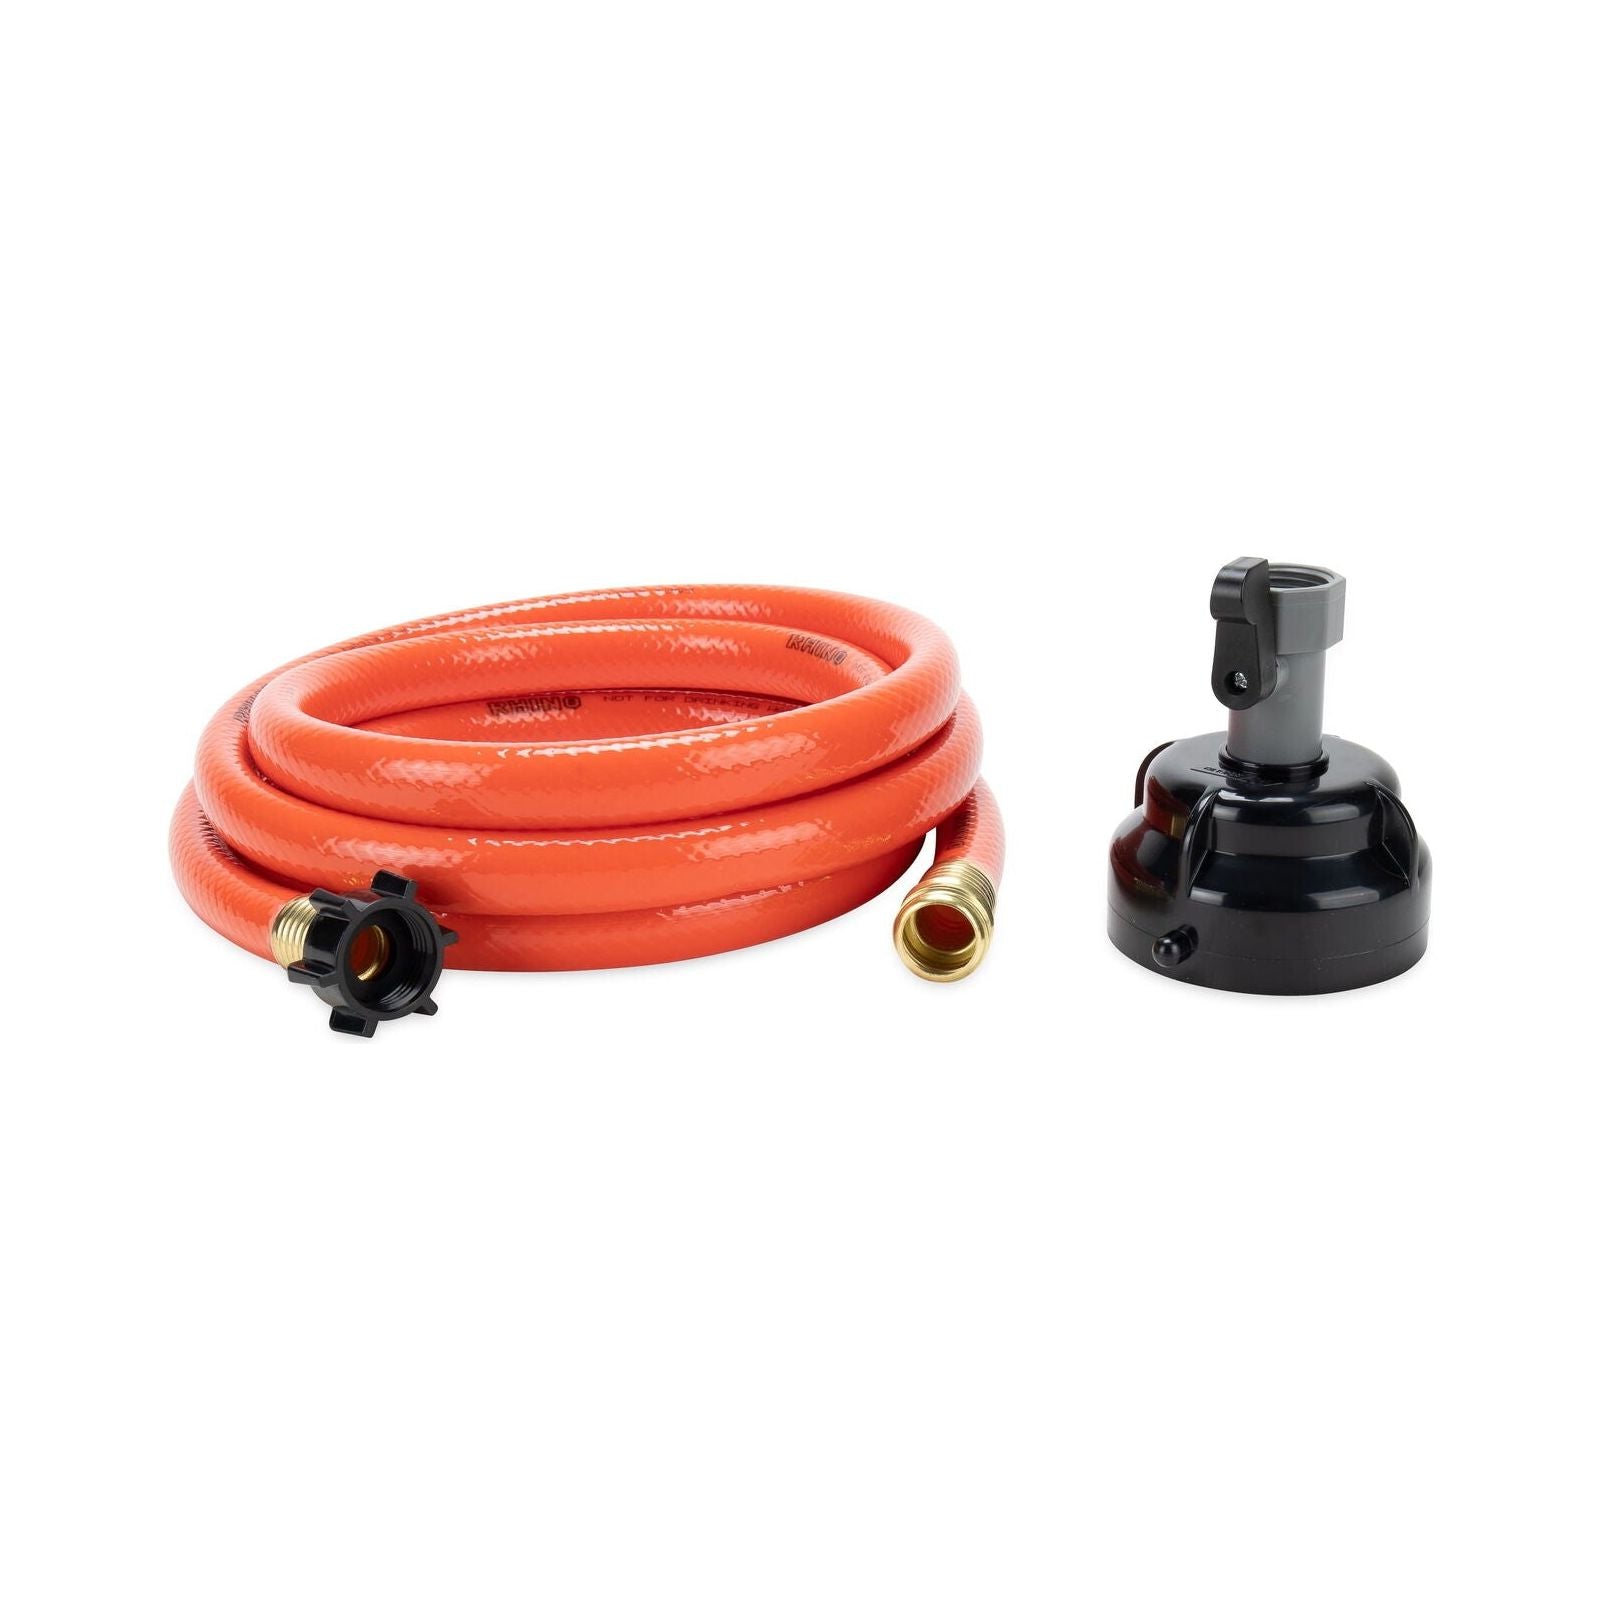 Camco RhinoFlex 10-Foot RV Clean out Hose with Rinser Cap 22999